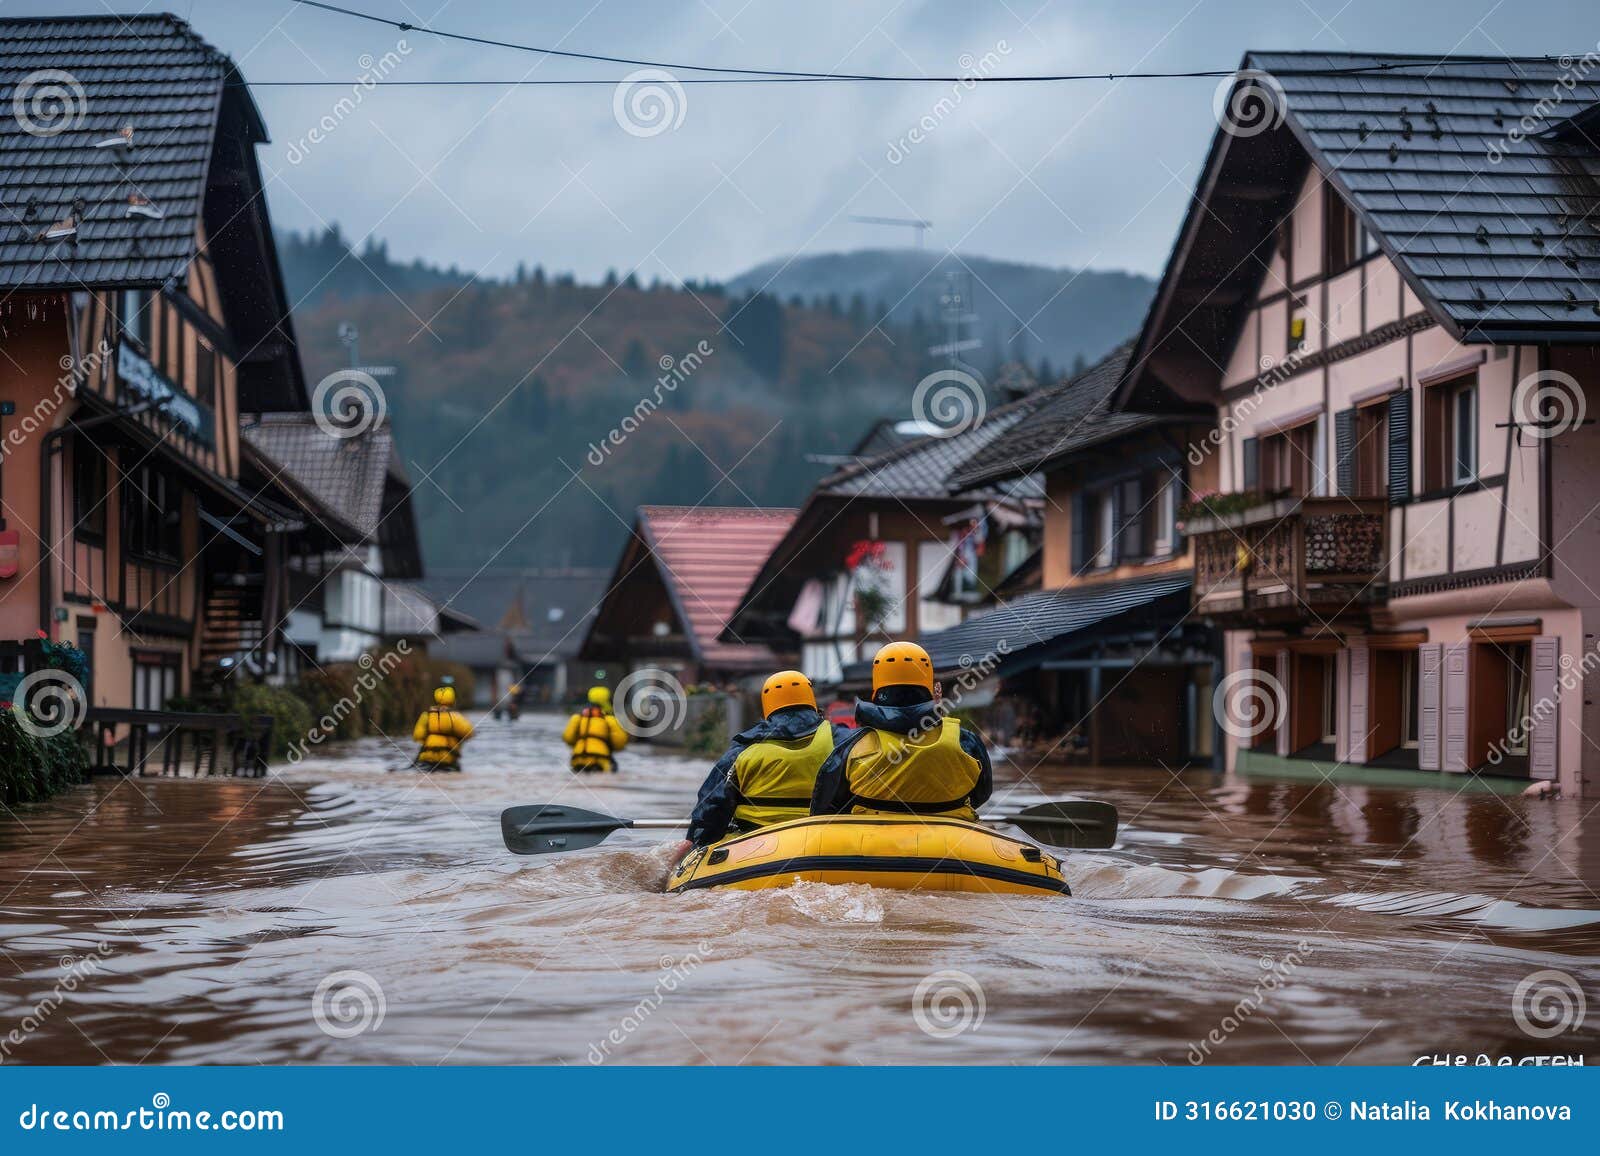 male rescuers sail a boat through a flooded city during a flood. rescue operation